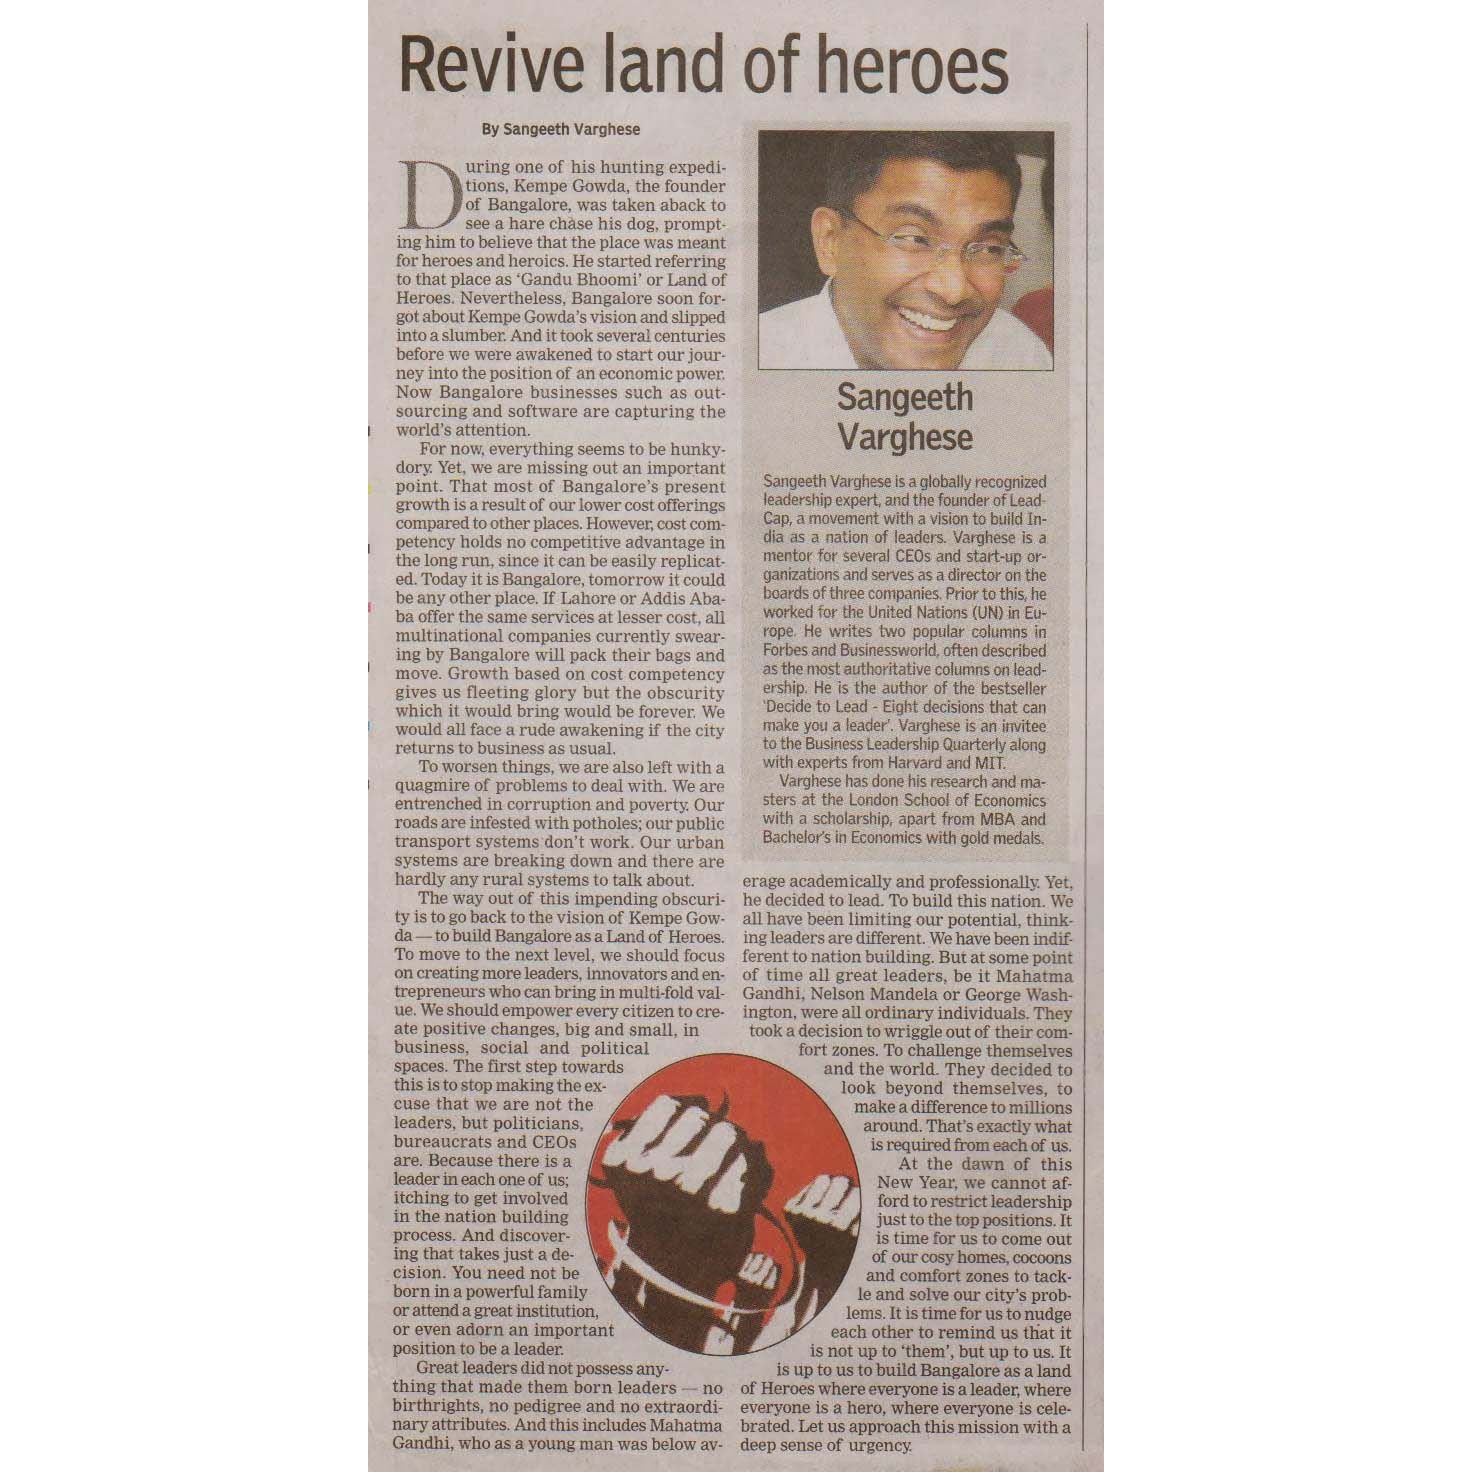 The Times Of India 1 January 2008-1